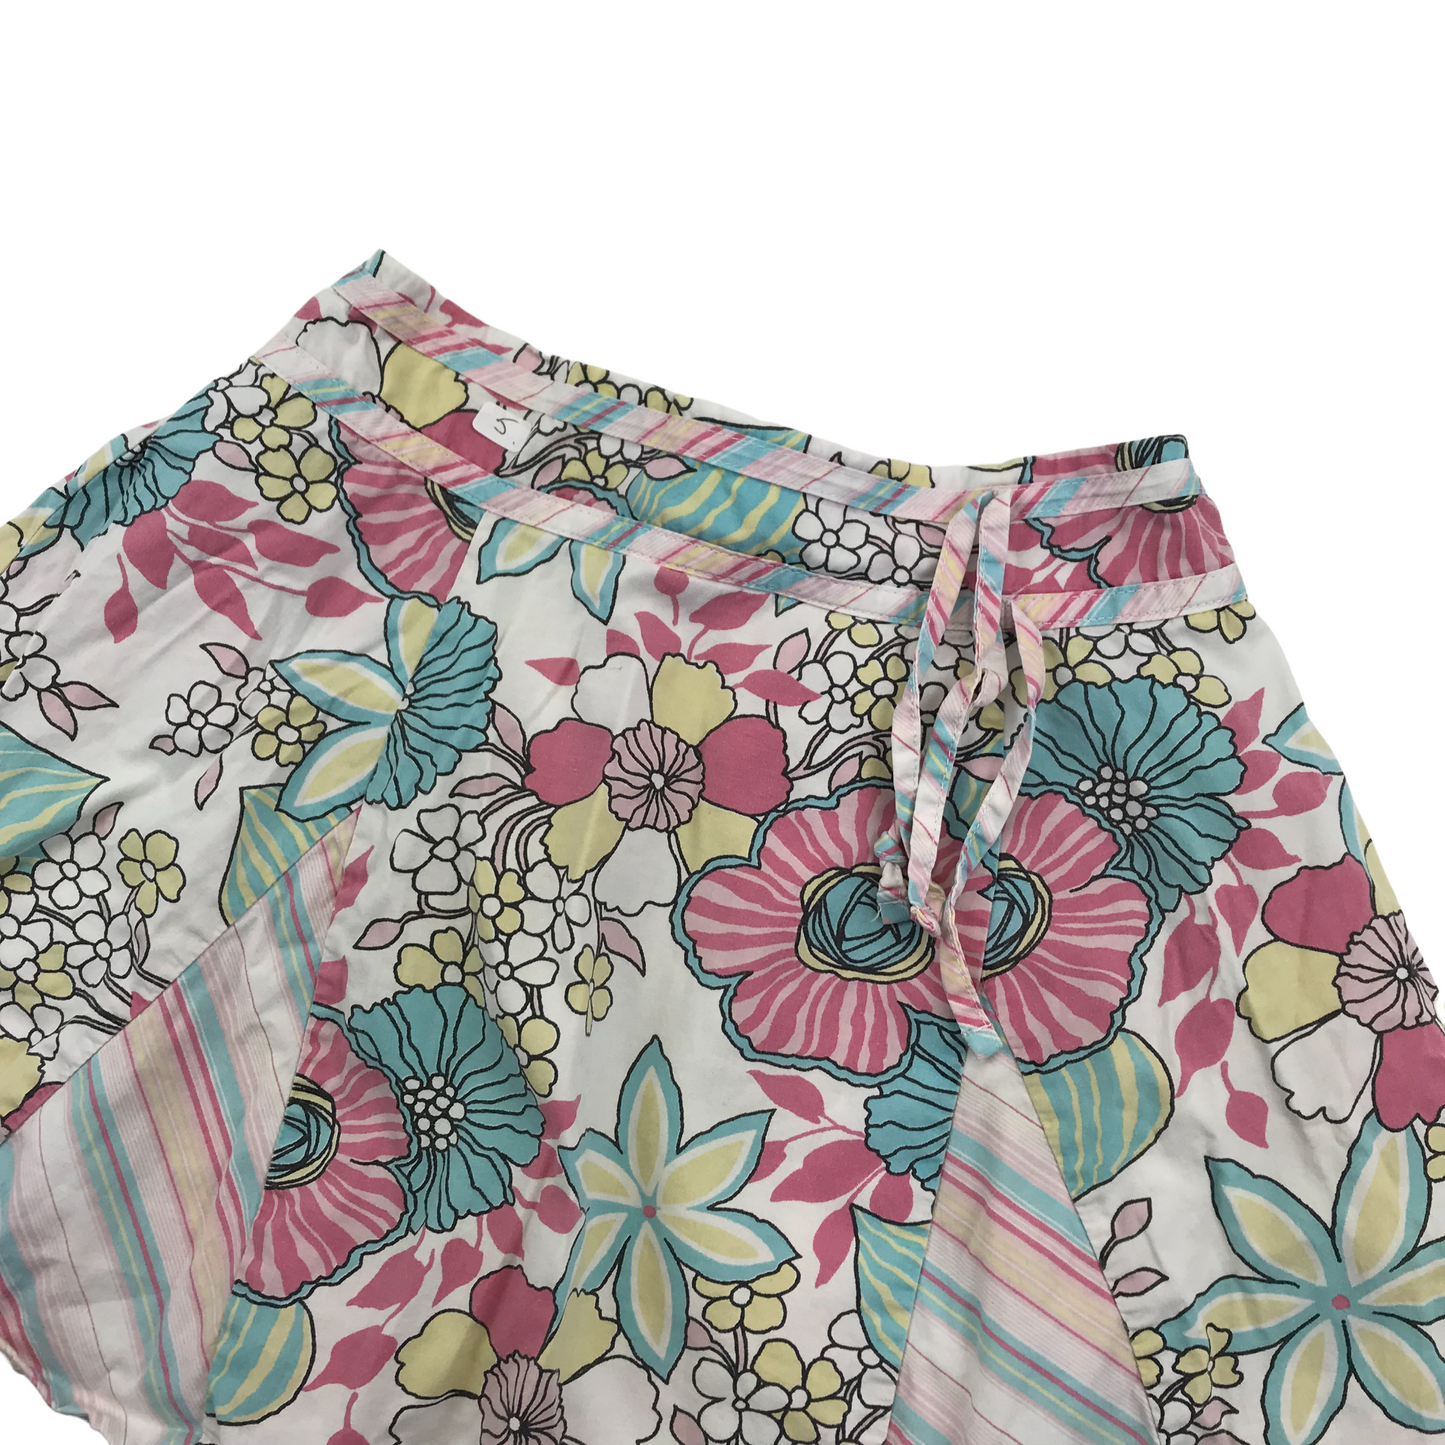 Adams Light Pink and Blue Floral Mini Skirt Age 5